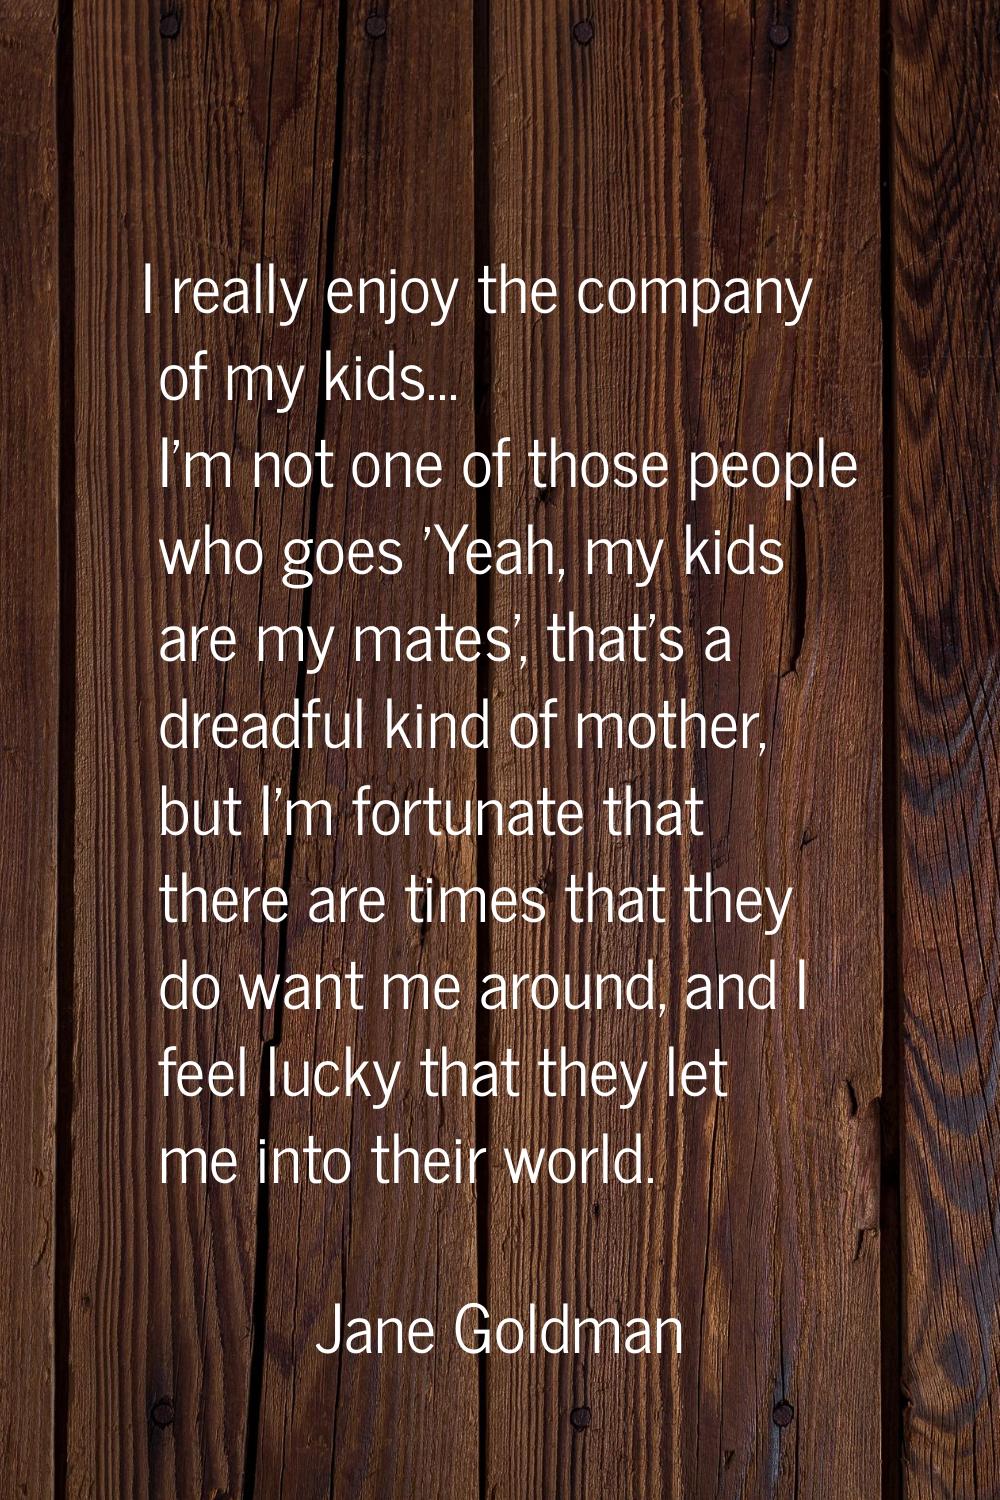 I really enjoy the company of my kids... I'm not one of those people who goes 'Yeah, my kids are my